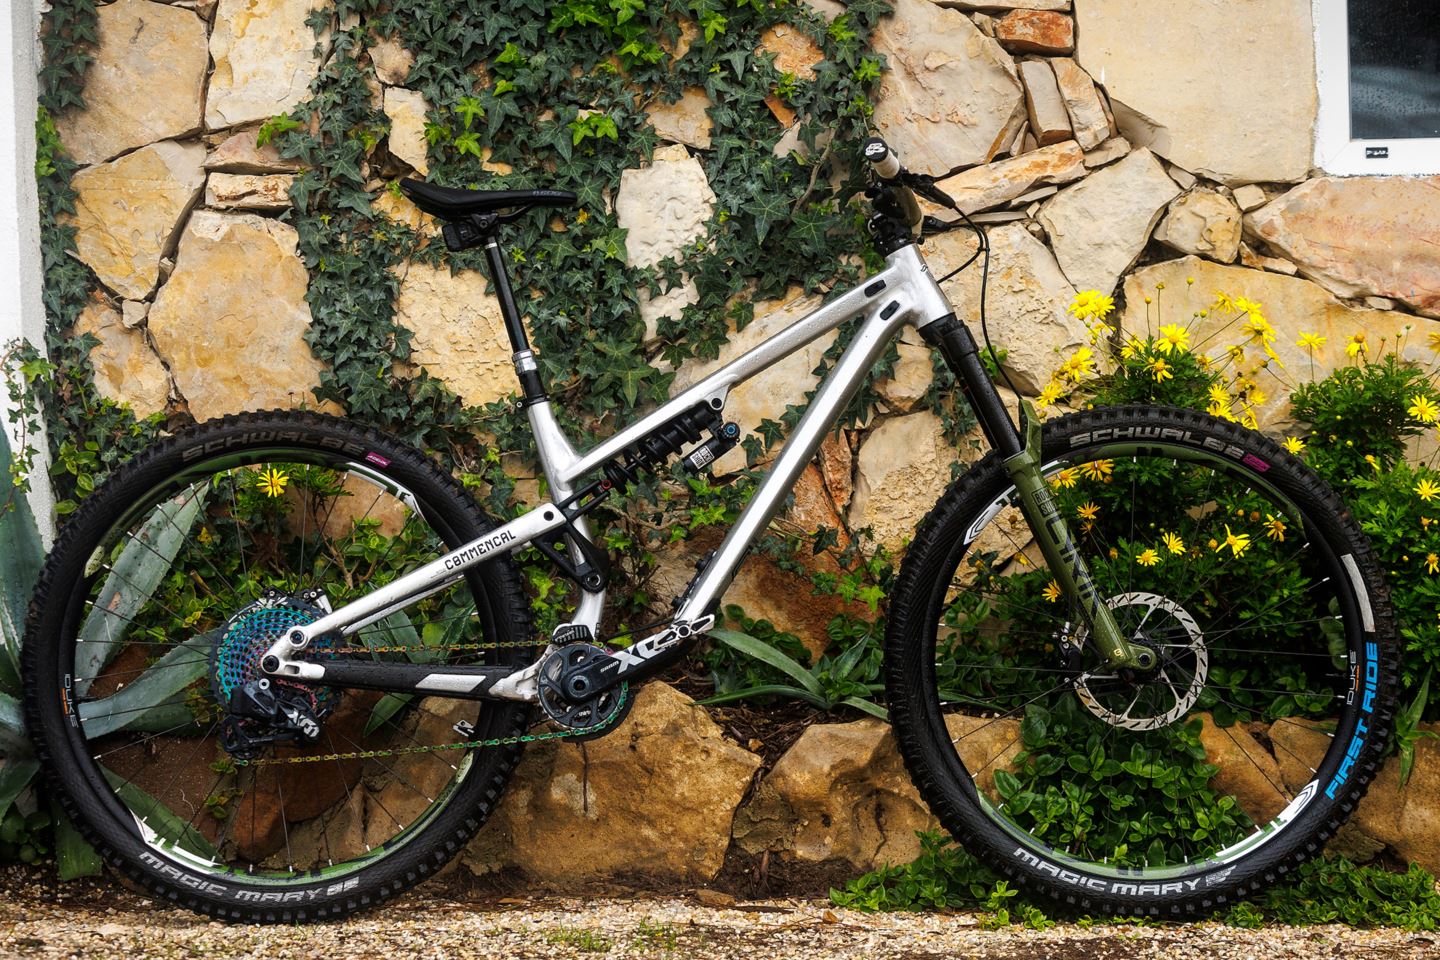 Cécile Ravanel's Commencal Meta TR specced with a Lyrik Ultimate and Super Deluxe Ultimate.